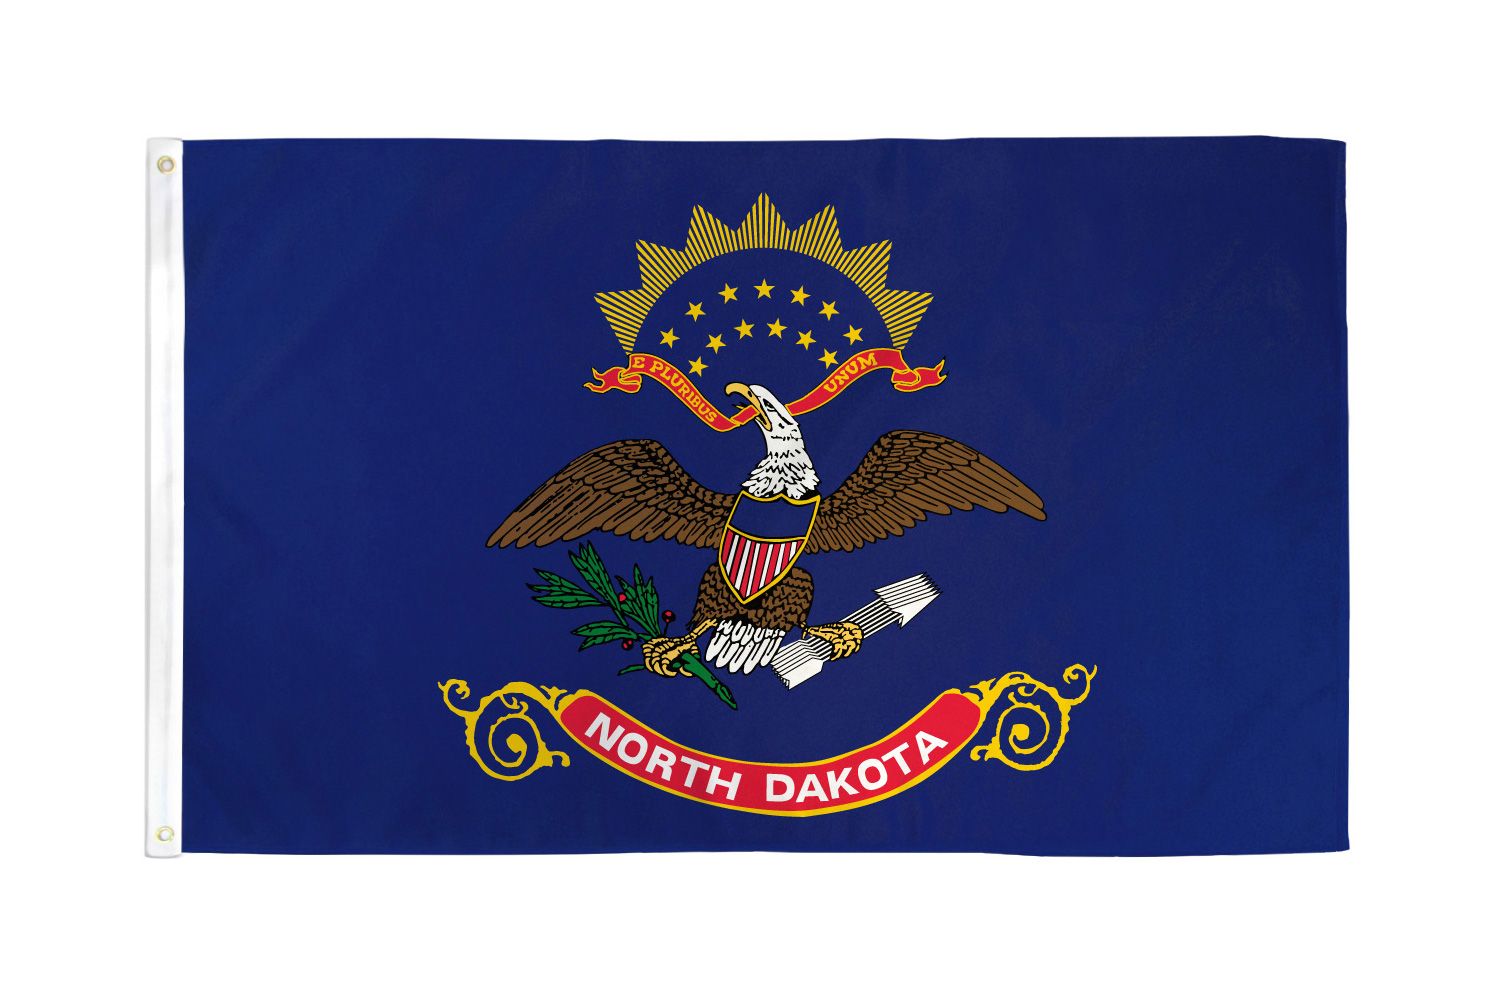 Shop72 North Dakota Flags 3x5' Sturdy Polyester Brass Grommets Double Stitched